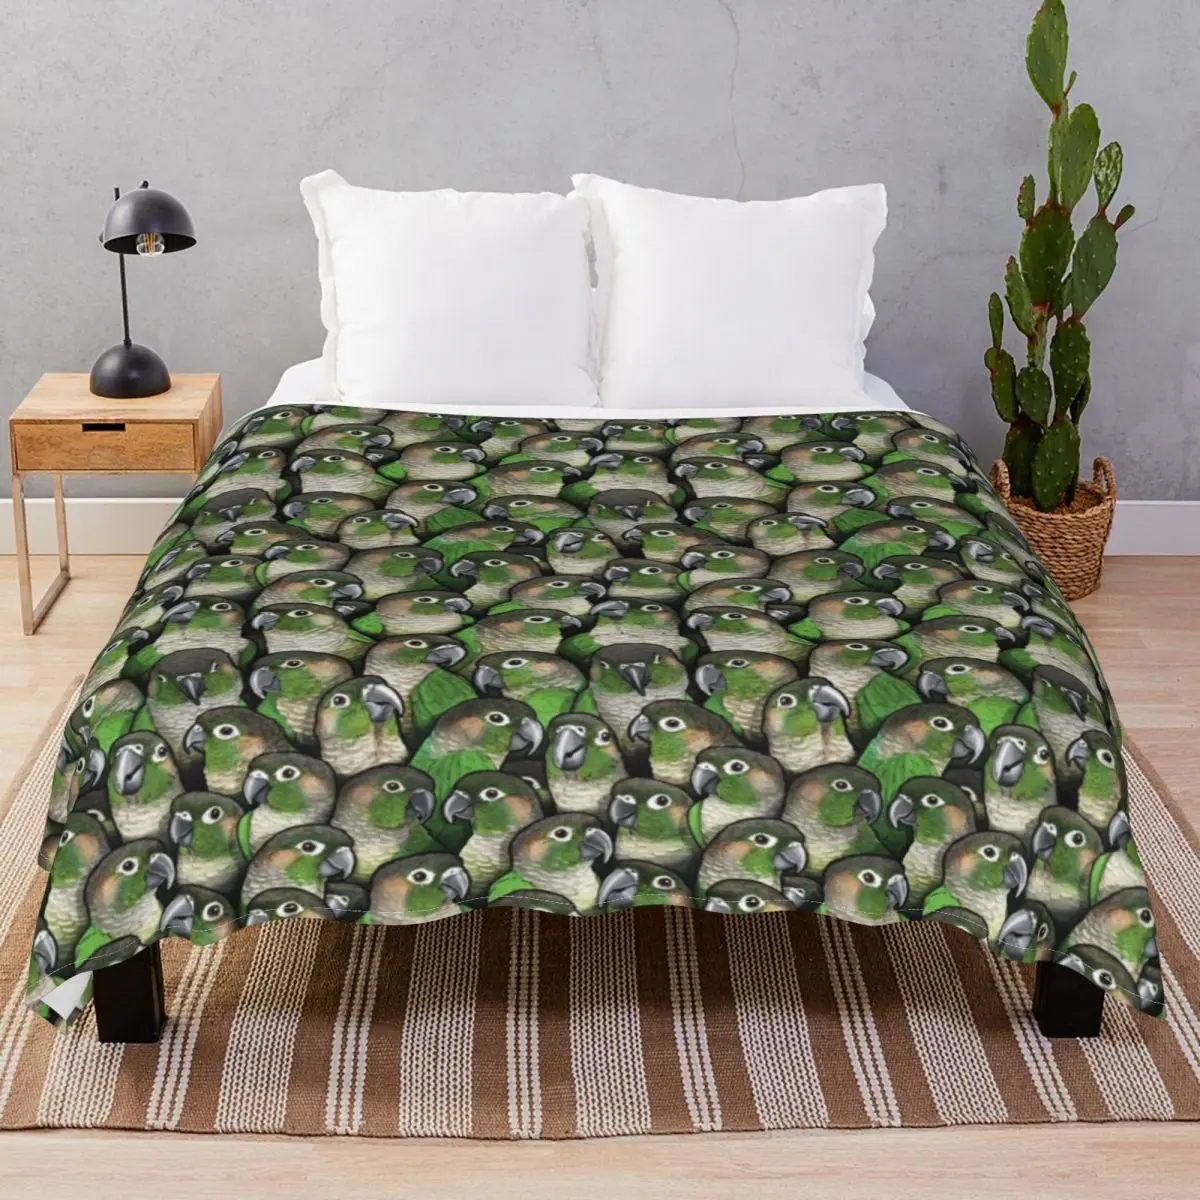 Green-cheeked Conures Blanket Fleece Winter Portable Throw Blankets for Bed Home Couch Travel Office